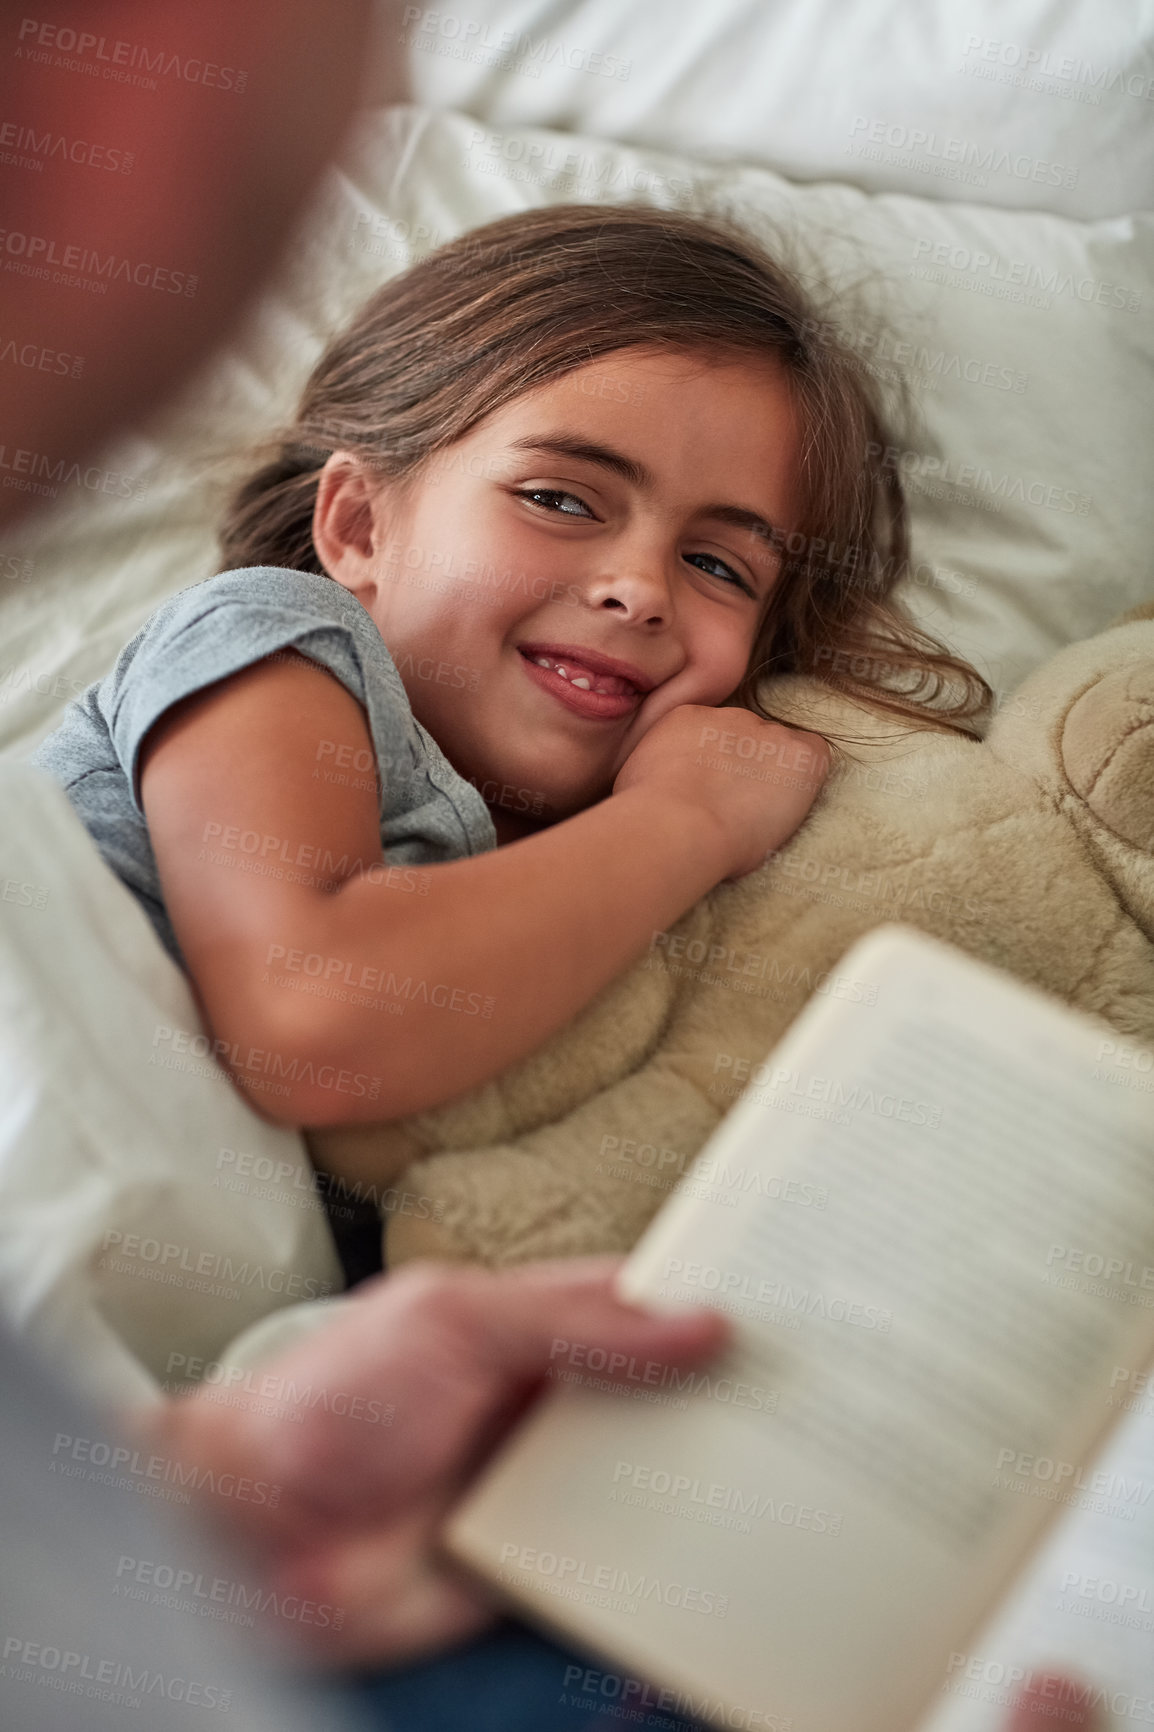 Buy stock photo Cropped shot of a little girl lying in bed while her father reads her a story